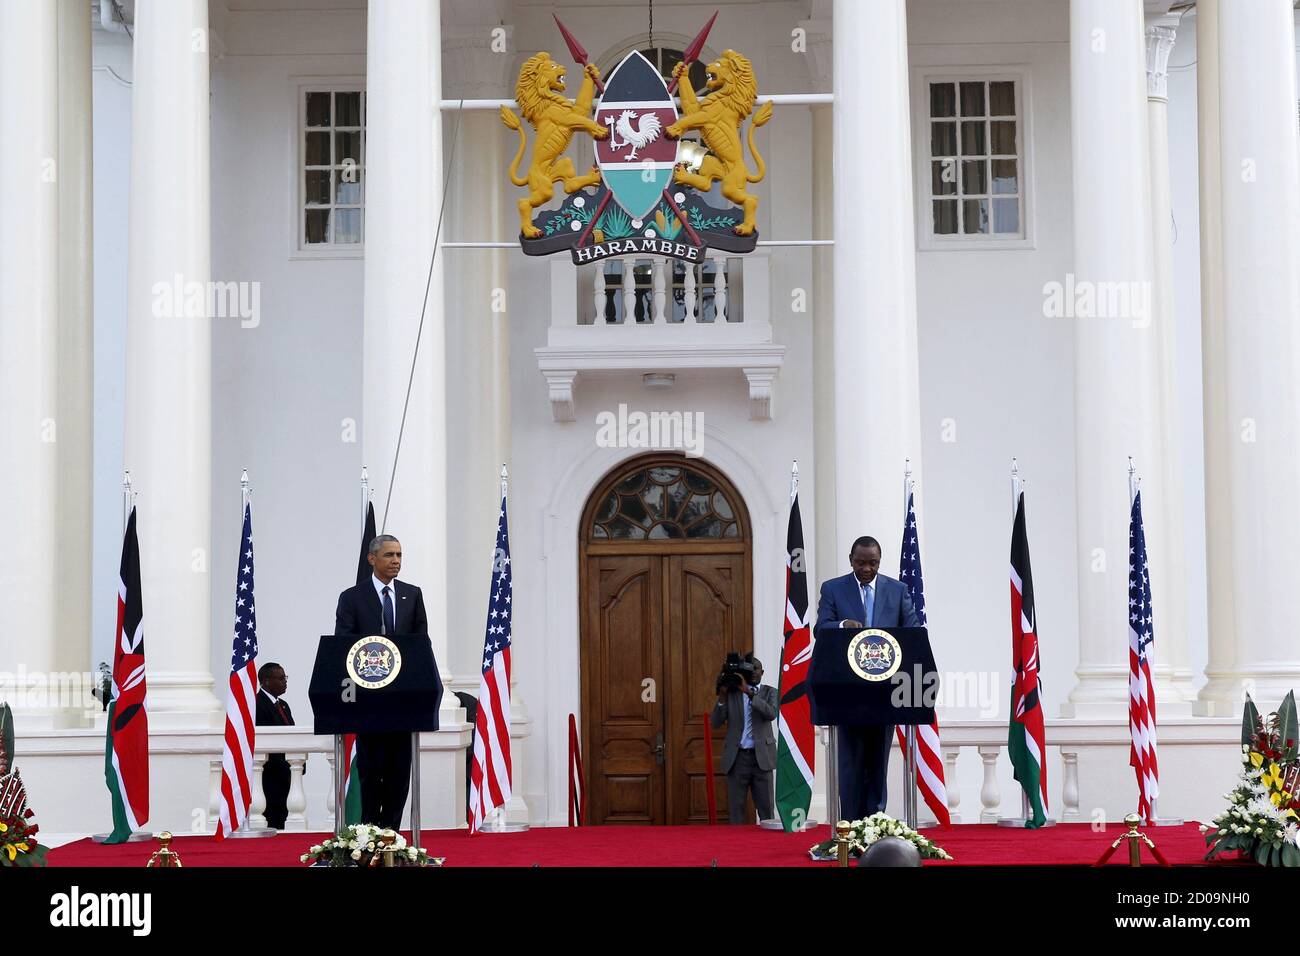 U.S. President Barack Obama (L) and Kenya's President Uhuru Kenyatta hold a joint news conference after their meeting at the State House in Nairobi, Kenya July 25, 2015. Obama told African entrepreneurs in Kenya on Saturday they could help counter violent ideologies and drive growth in Africa, and said governments had to assist by ensuring the rule of law was upheld and by tackling corruption. REUTERS/Thomas Mukoya Stock Photo